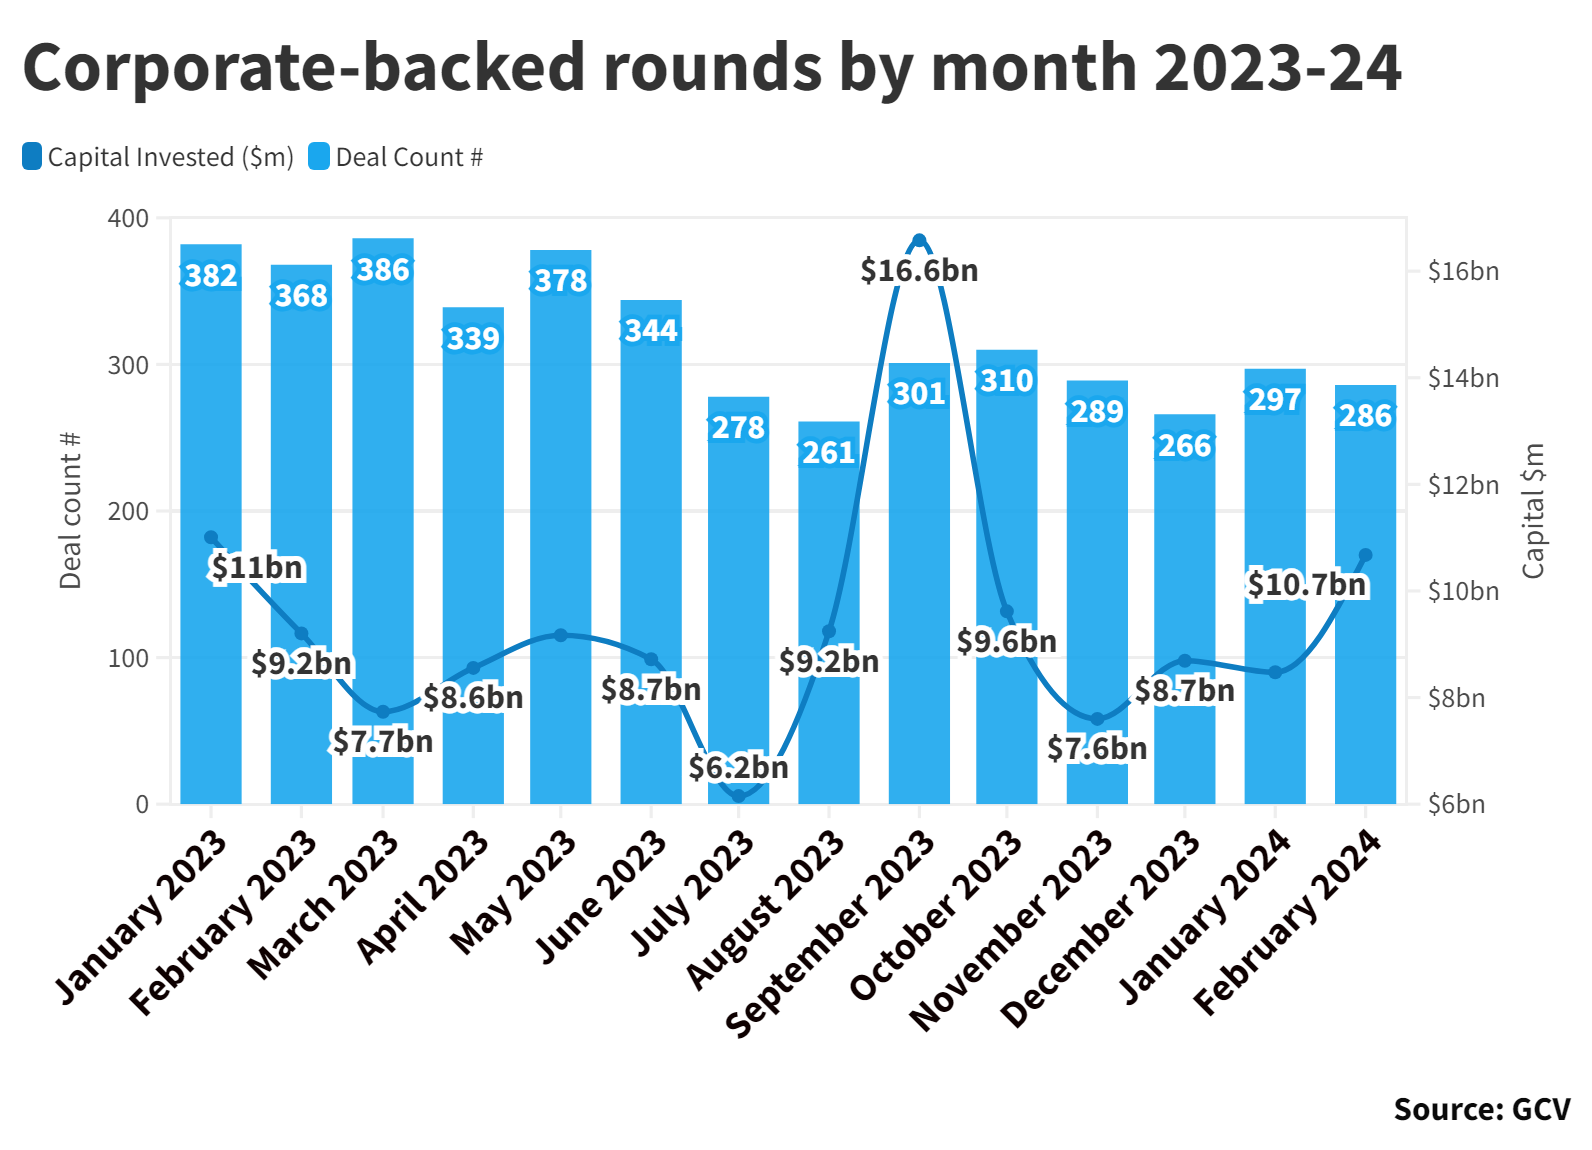 Bar and line chart showing corporate-backed funding rounds by month 2023-24. Source: GCV